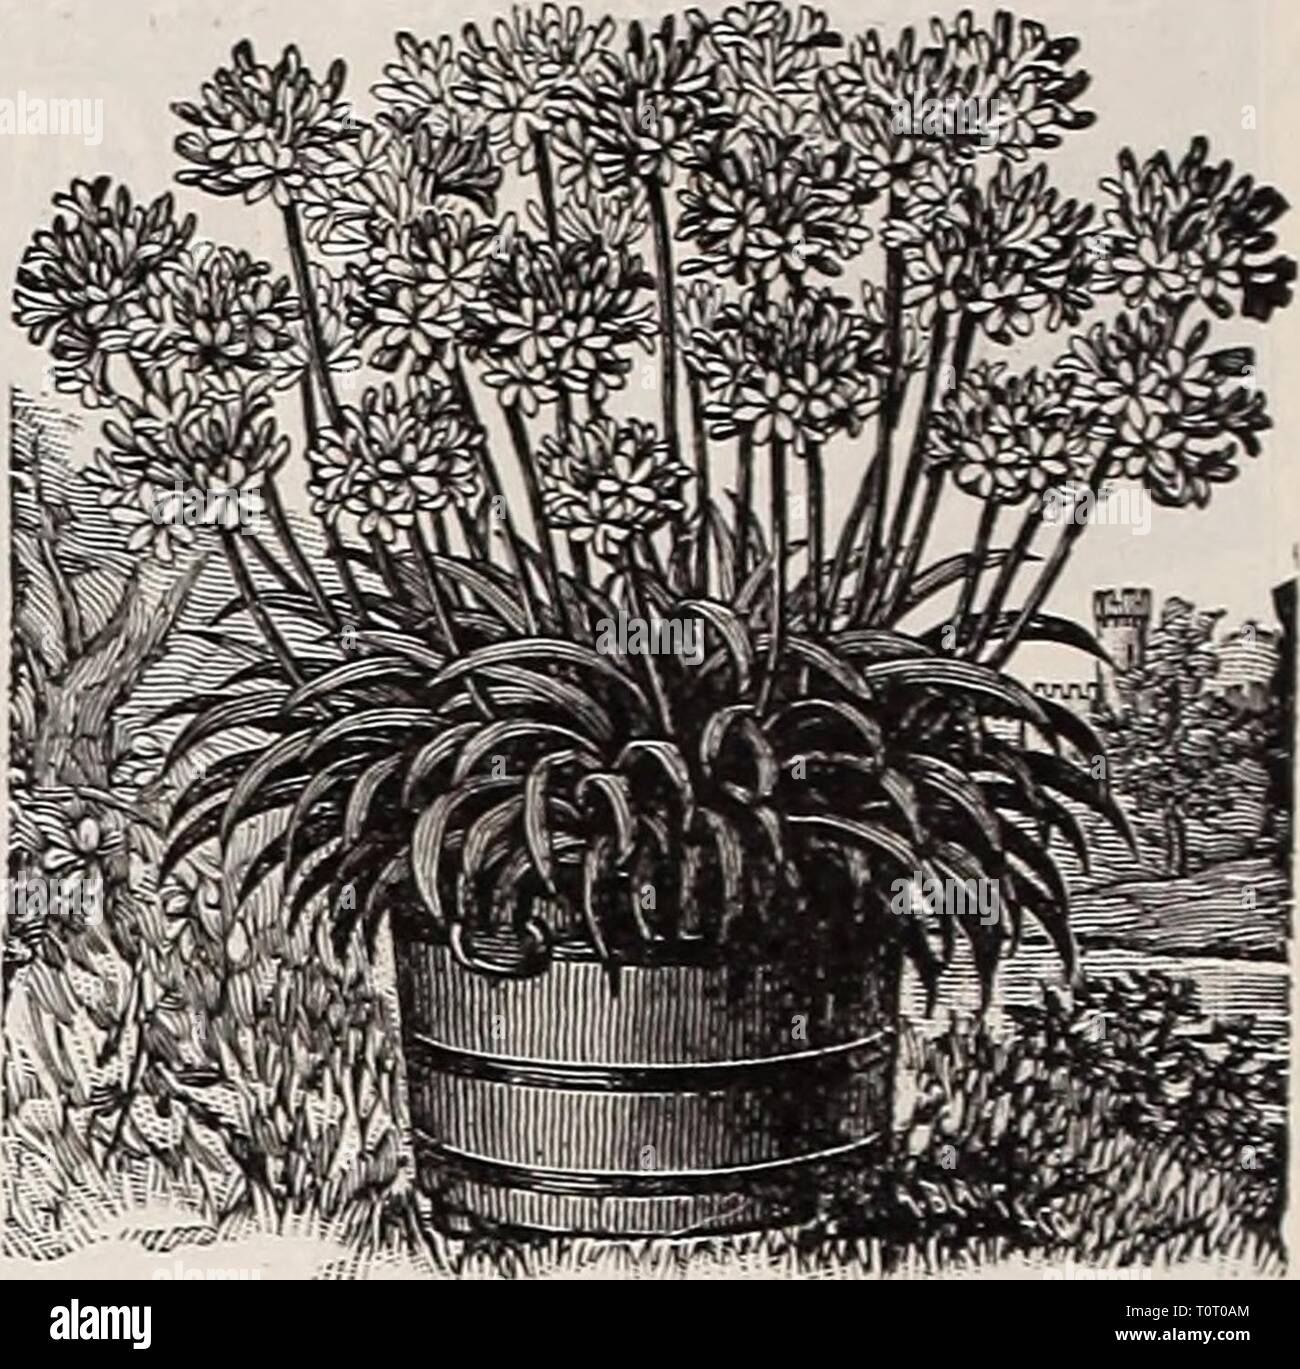 Dreer's 1909 garden book (1909) Dreer's 1909 garden book  dreers1909garden1909henr Year: 1909  120 AGAPANTHUS. UmbellatllS (Blue Lilv of the ATile). A splendid ornamental plant, bearing clusters of bright blue flowers on long flowerstalks and lasting a long time in bloom. A most desirable plant for outdoor decoration, planted in large pots or tubs on the lawn or piazza. — AlbuS. A white-flowering variety. 15 cts. each; $1.50 per doz. One of each, 25 cts. AGERATUM (Floss Flower). One of the best of bedding plants; always in bloom. Blanche. Dwarf, compact white. I Princess Pauline. Blue, white c Stock Photo